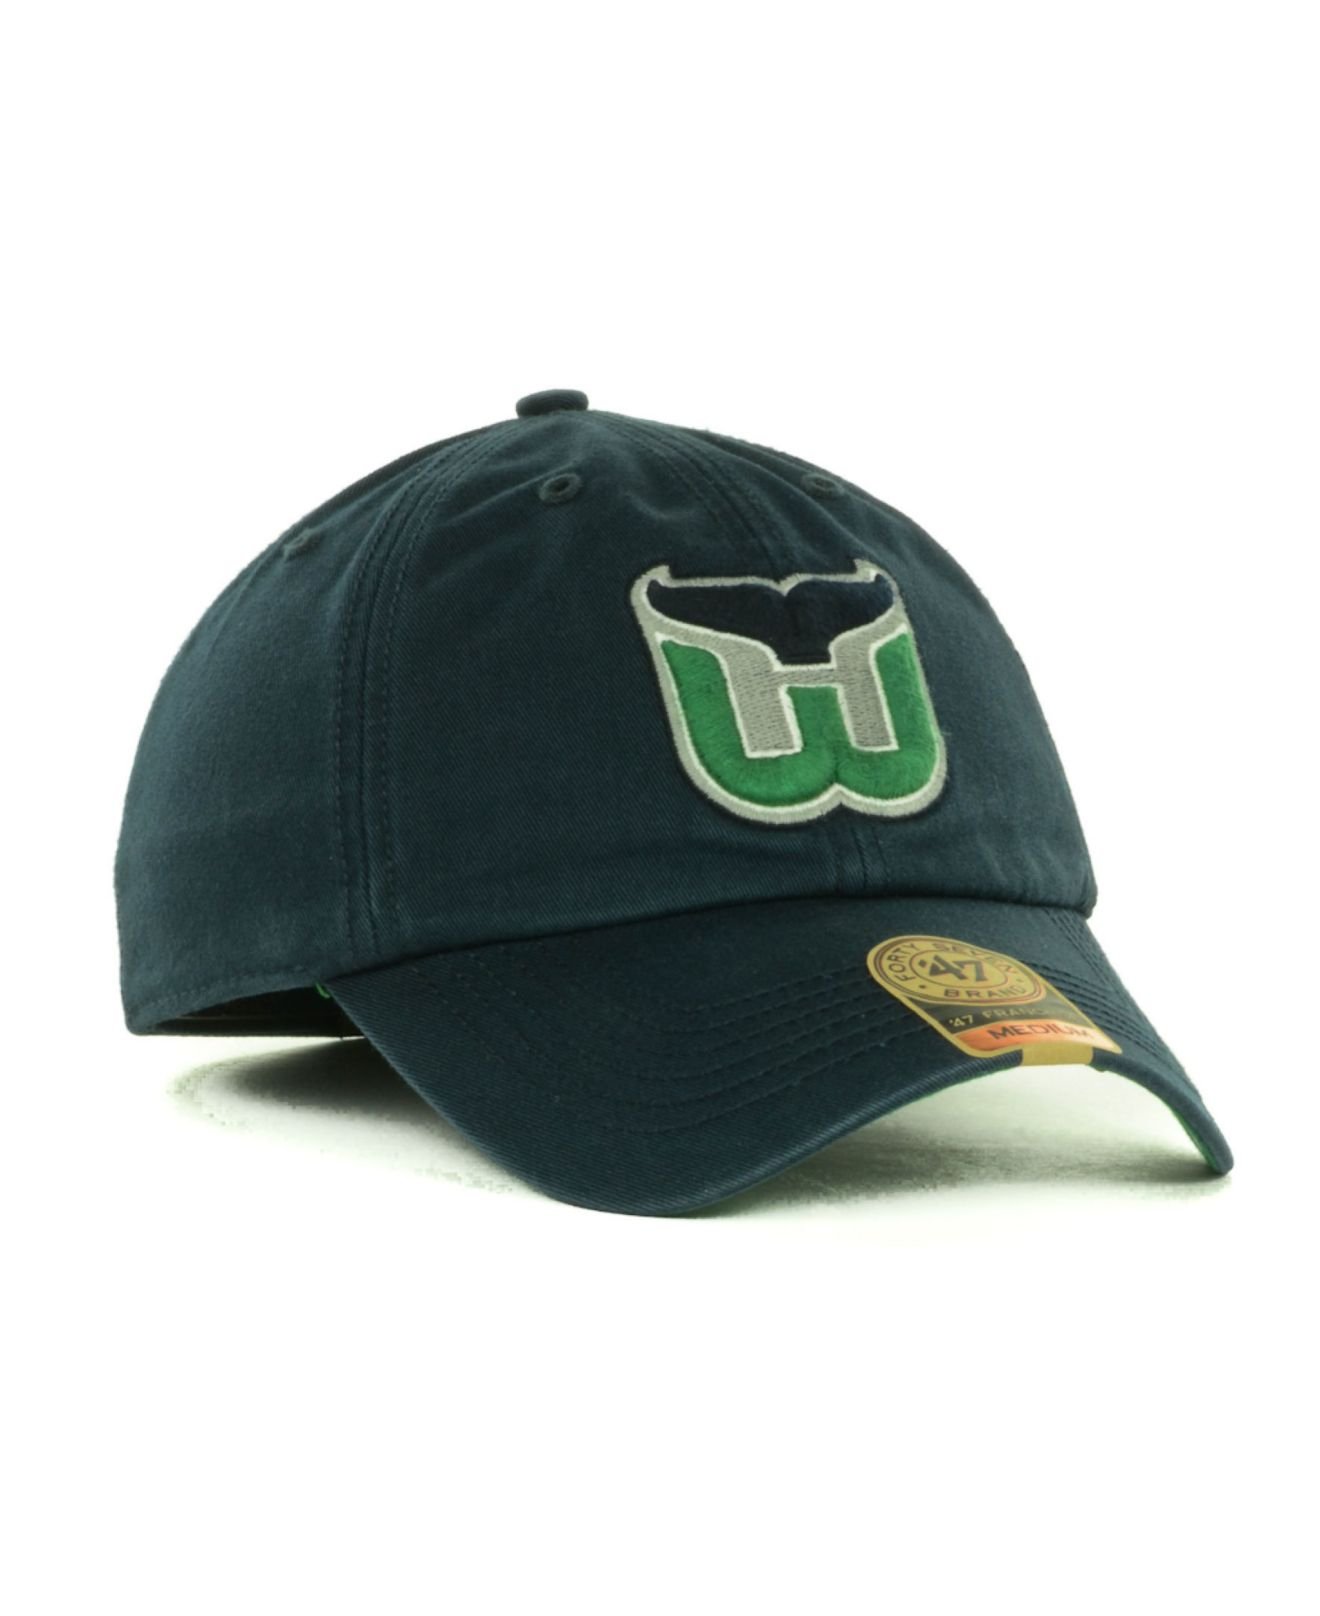 47 Brand Hartford Whalers Two Tone Blackout Snap-Back Hat in stock